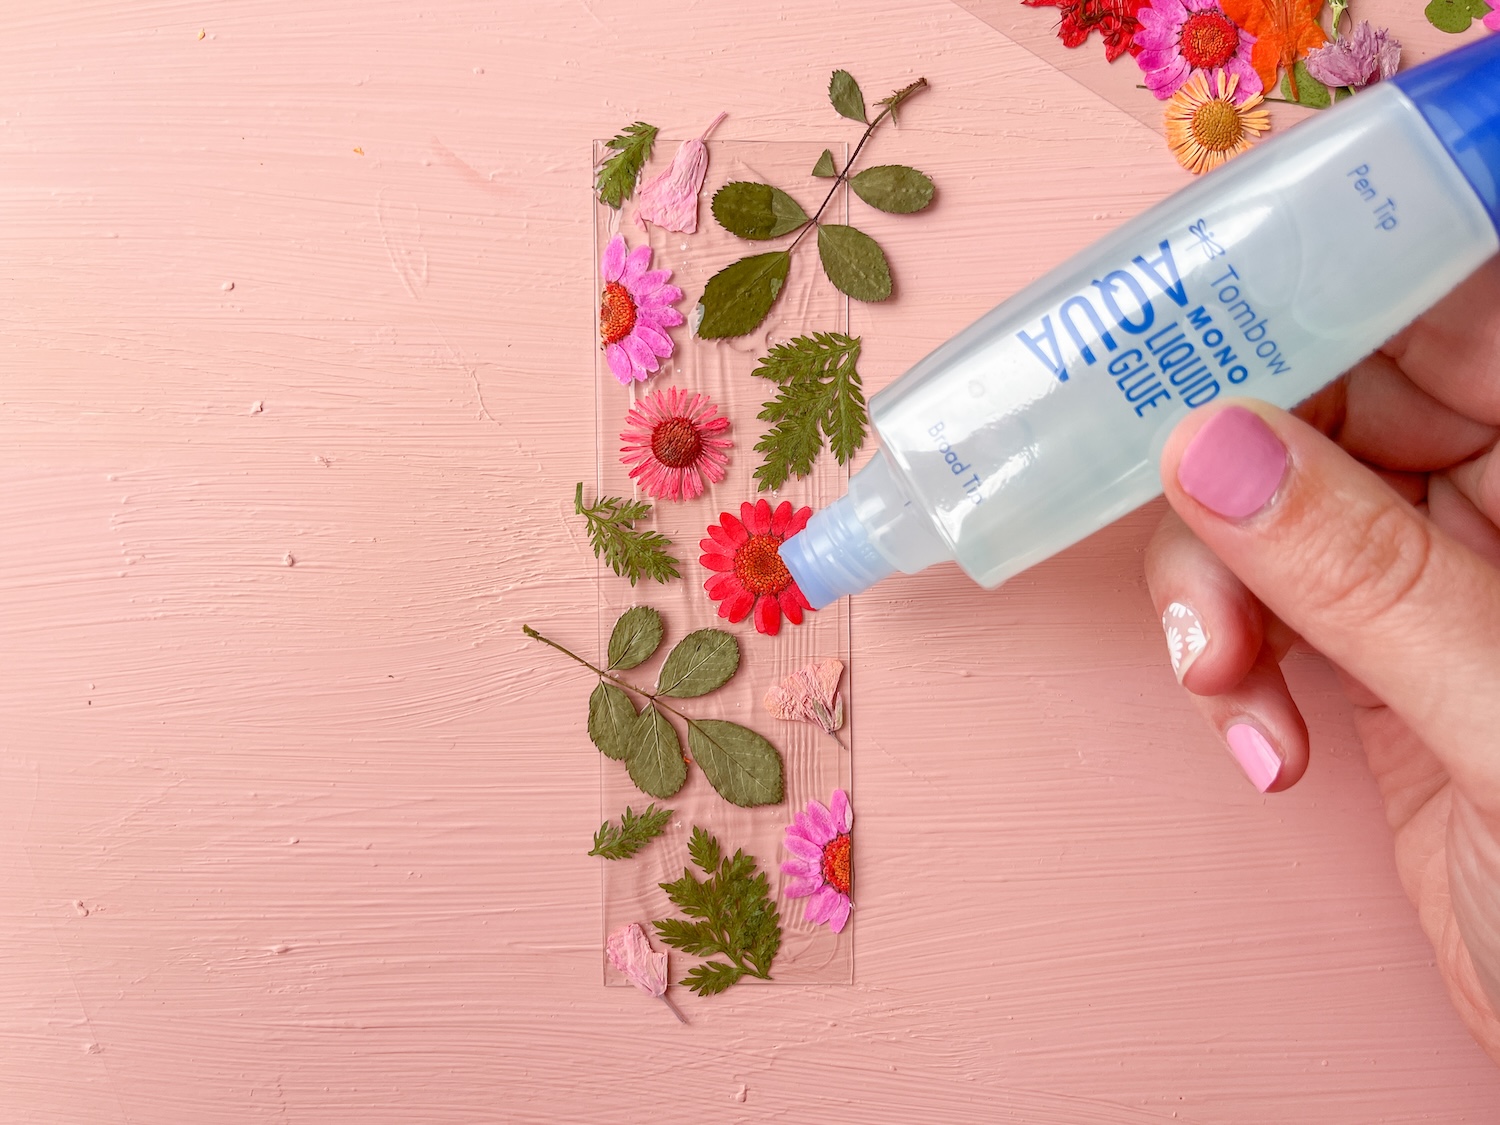 Use Tombow MONO Aqua Liquid Glue to add a clear topcoat over your dried flowers